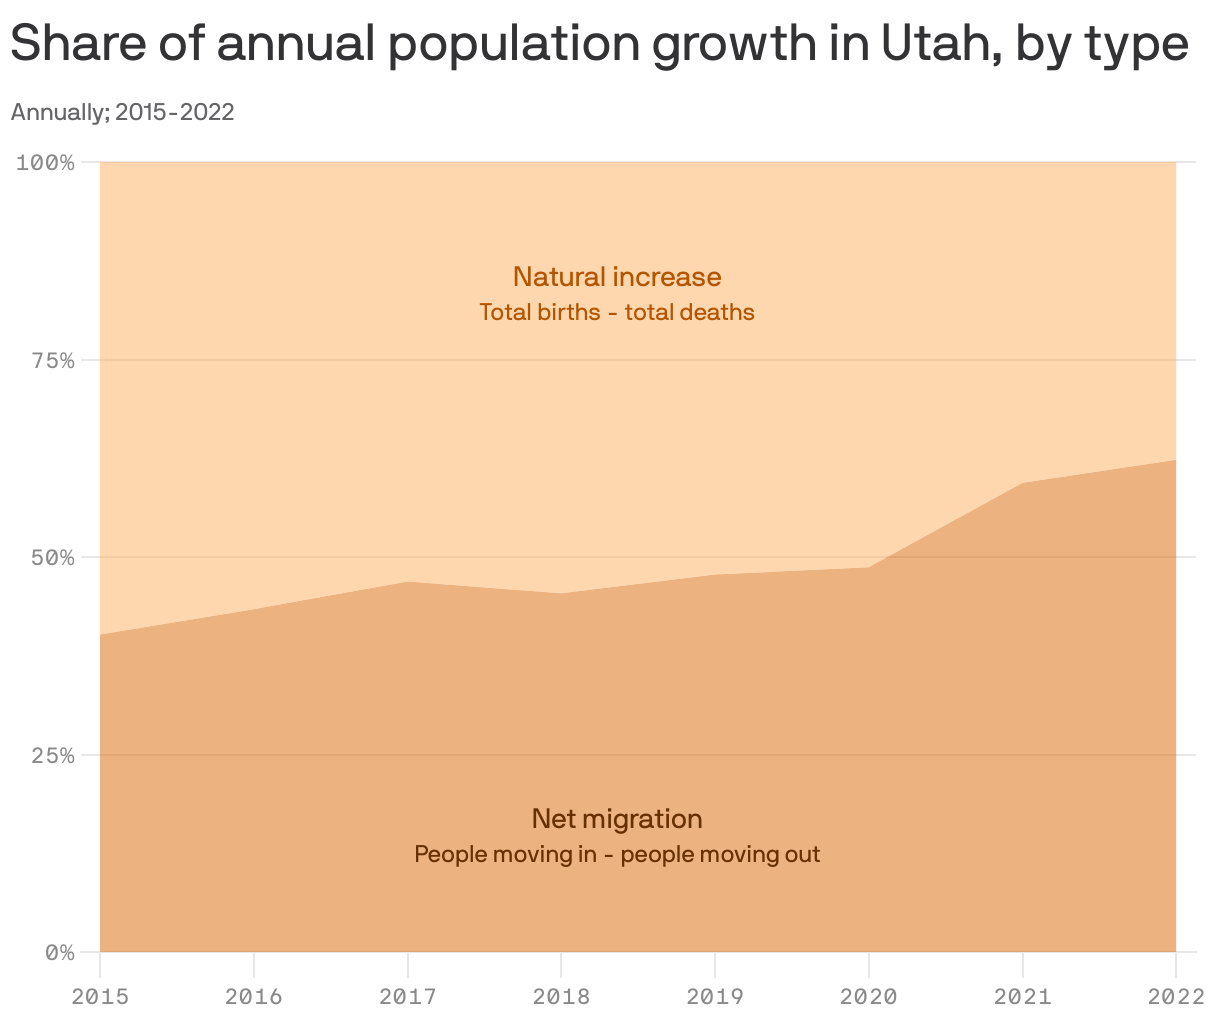 Share of annual population growth in Utah, by type